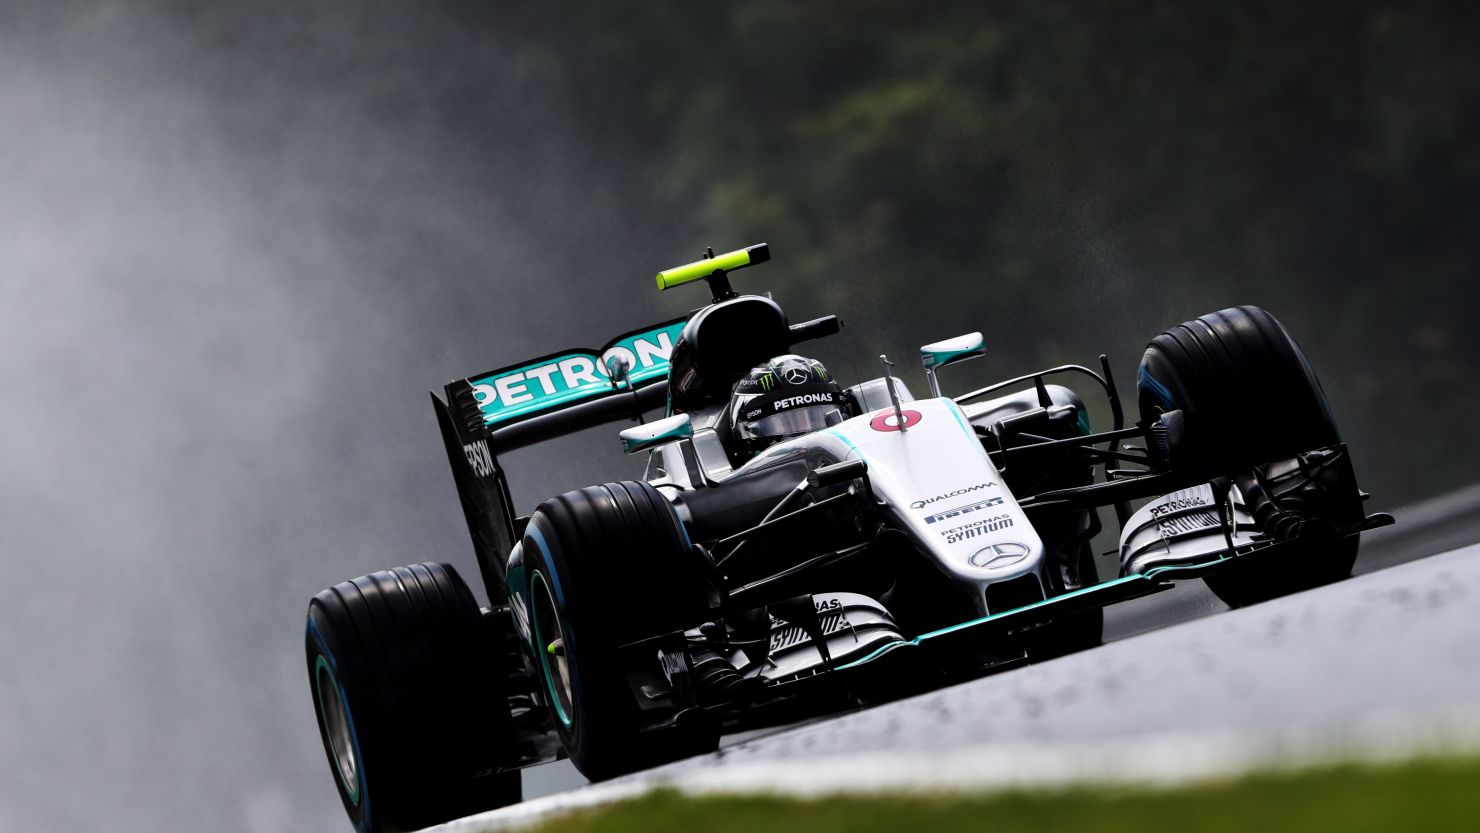 Nico Rosberg on track during qualifying for the Hungarian Grand Prix.